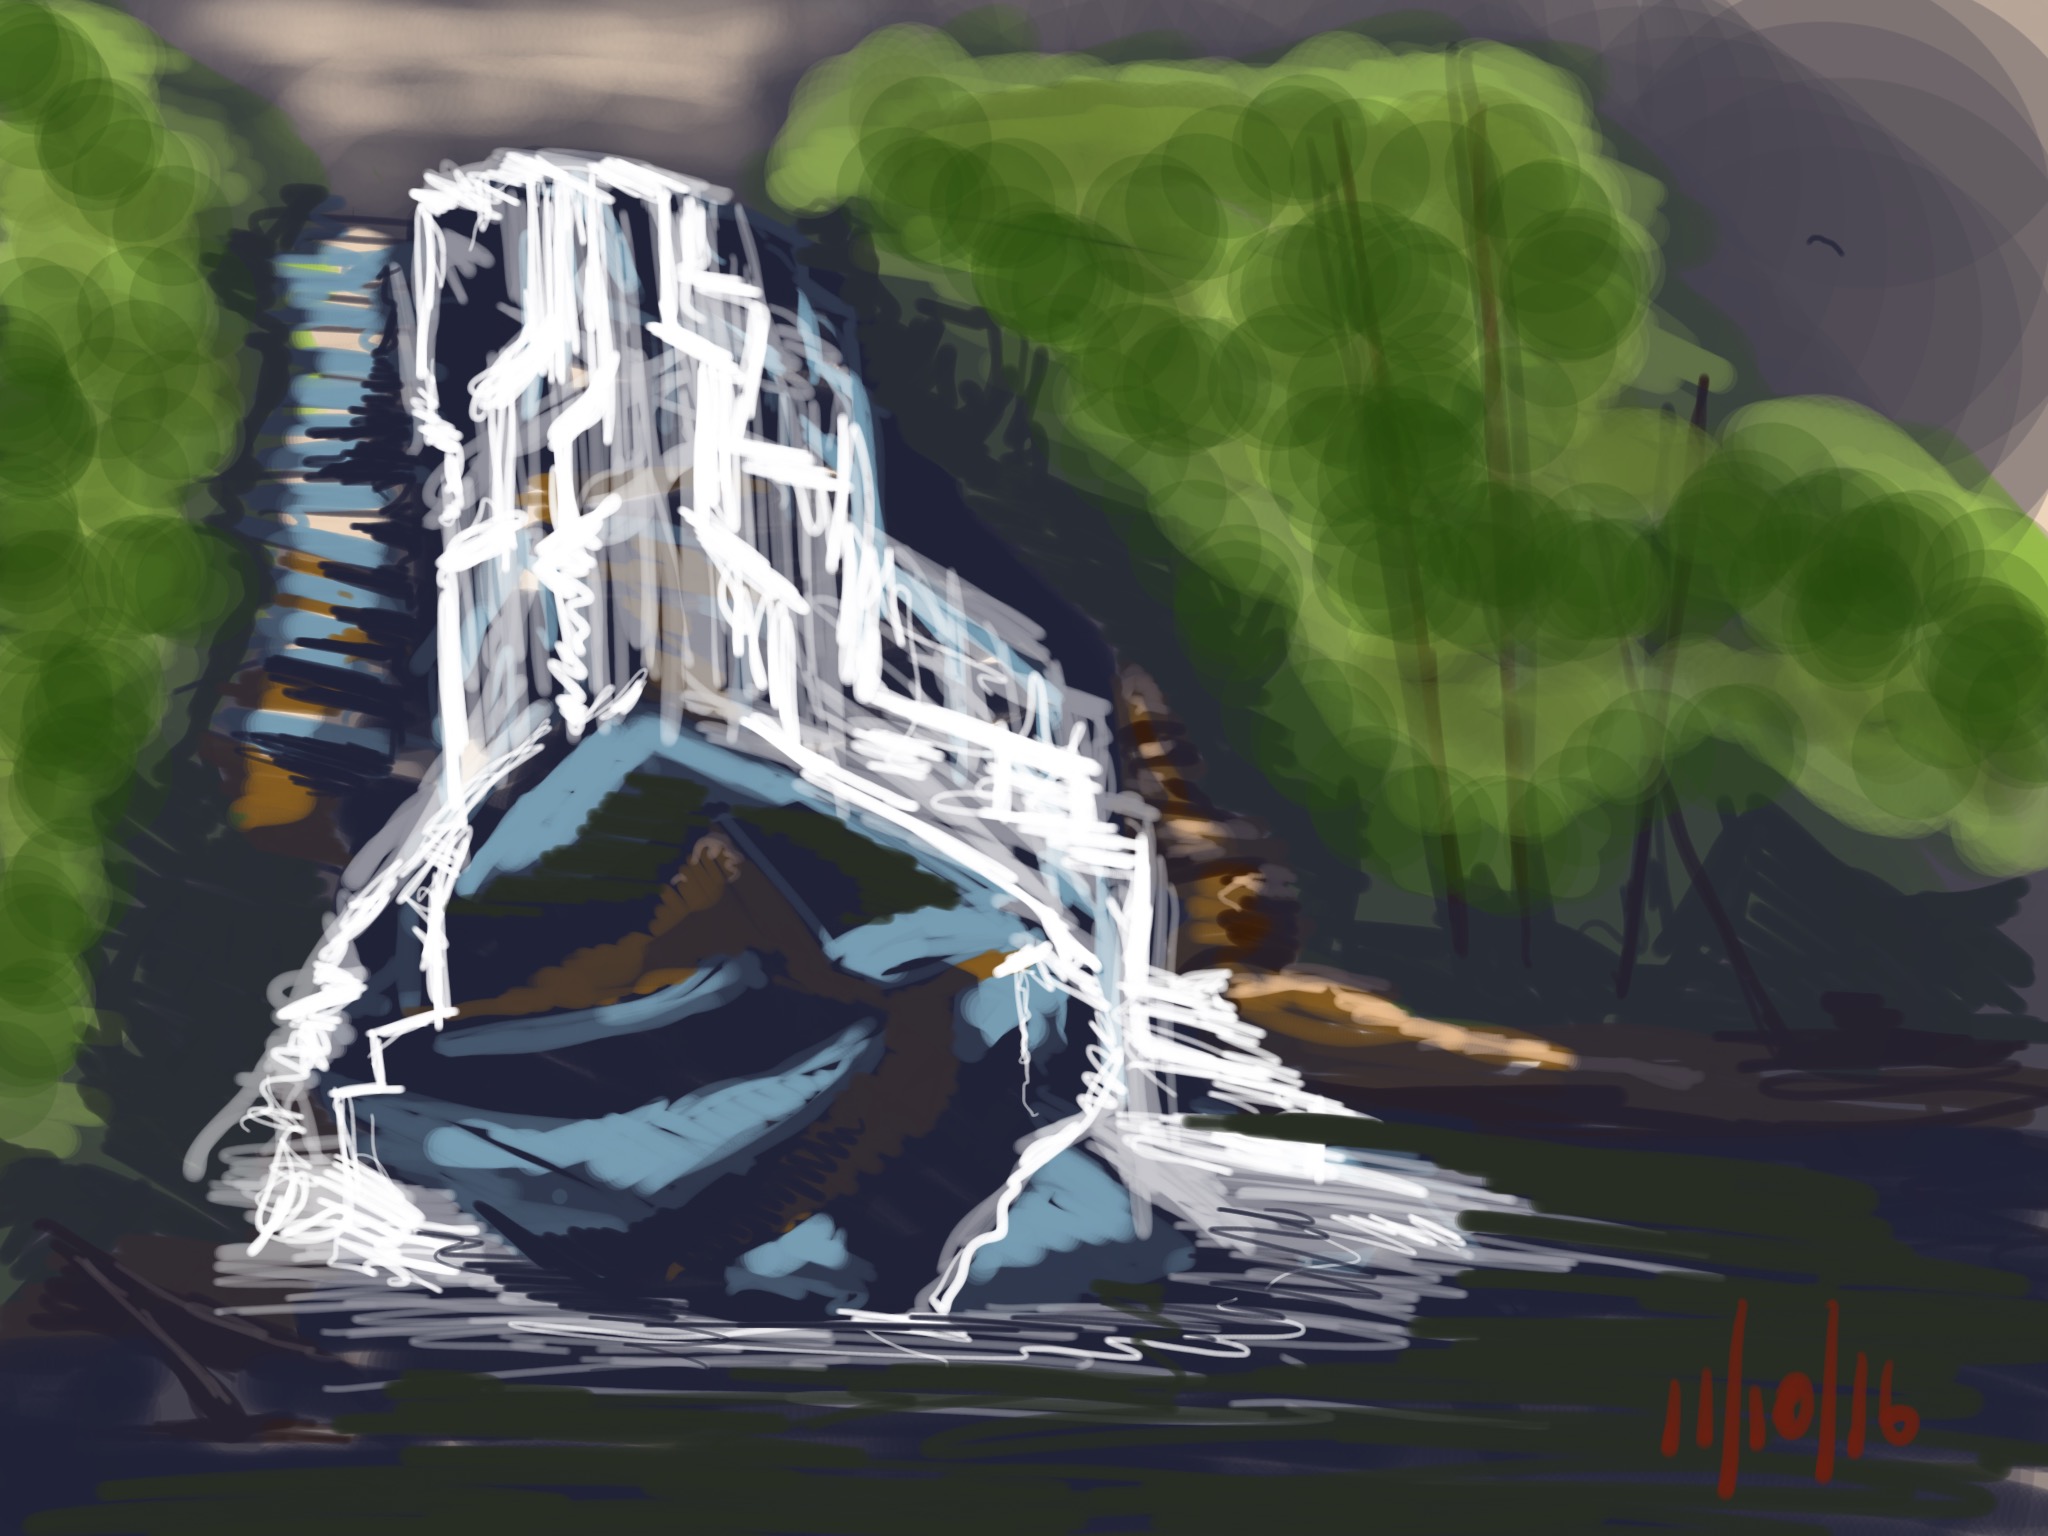 #gdpipeline daily challenge 11-10-16 "waterfall"